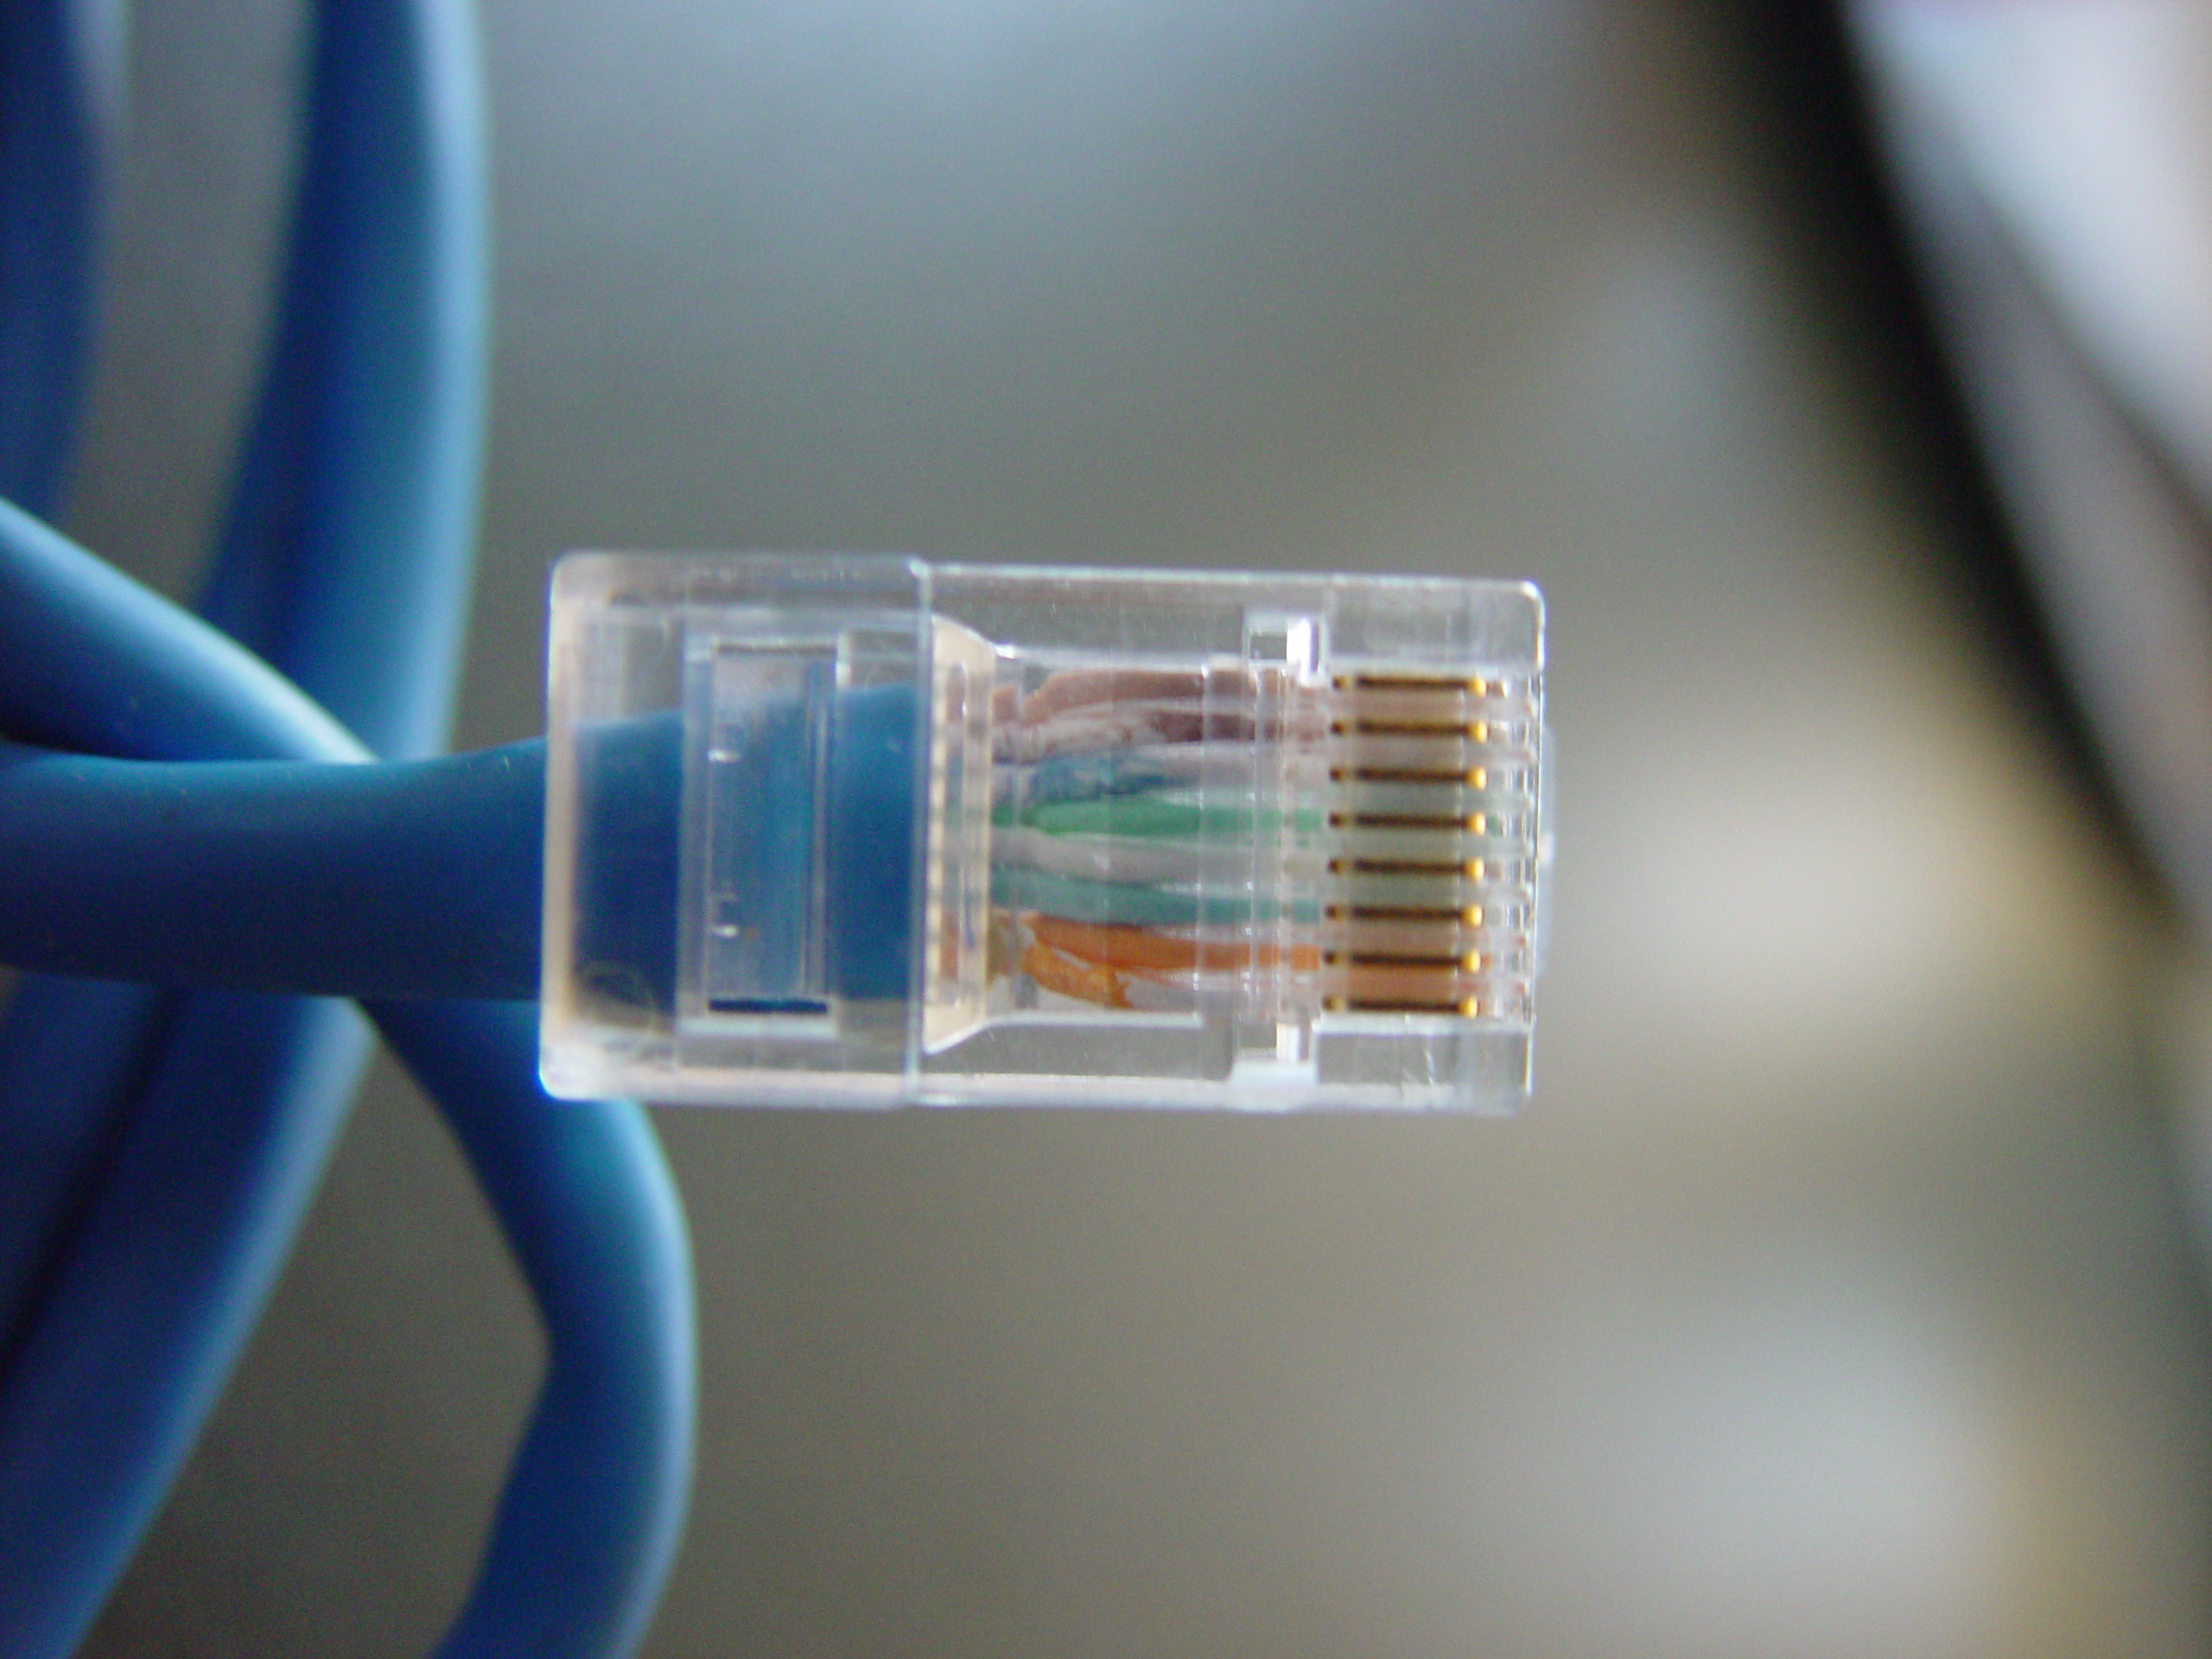 Do You Have Cable Confusion?